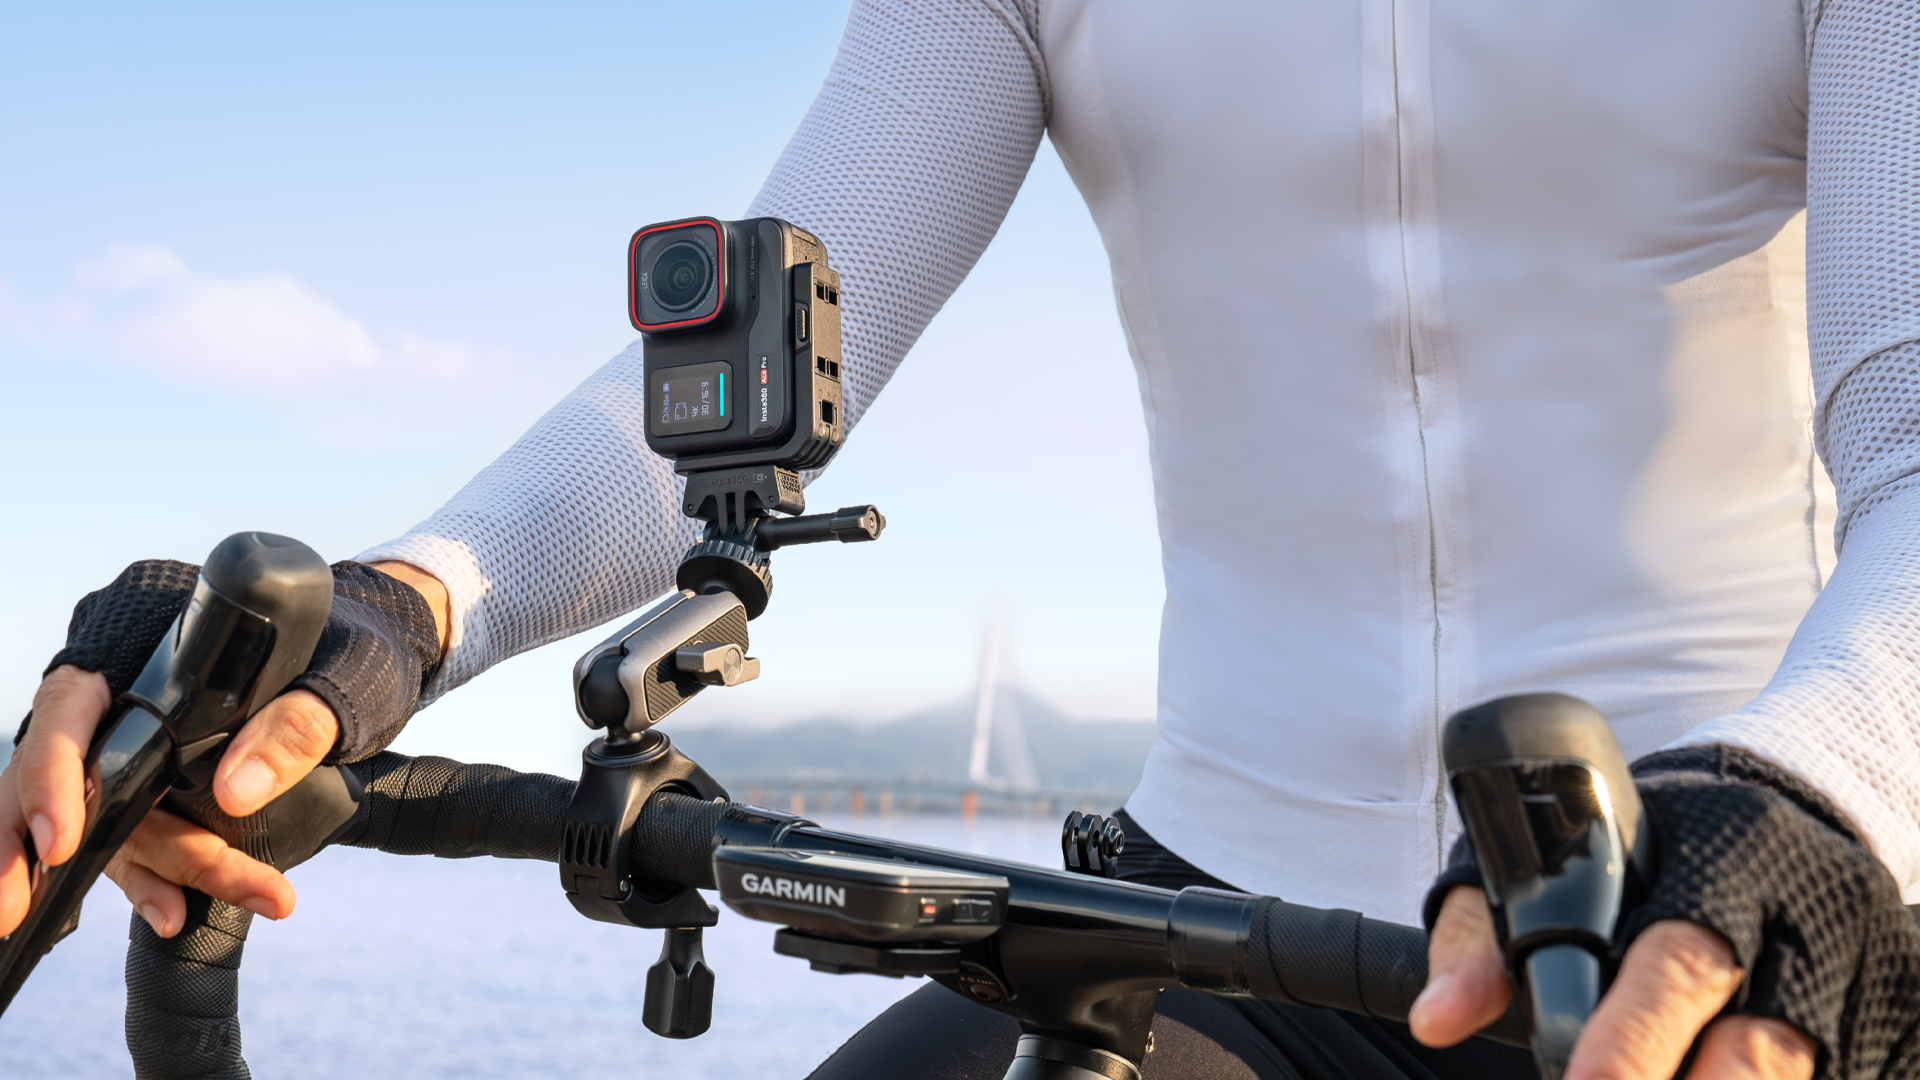 Insta360 X3 Action Camera Review: The ultimate bike camera with 2 major  flaws - Bike Shop Girl